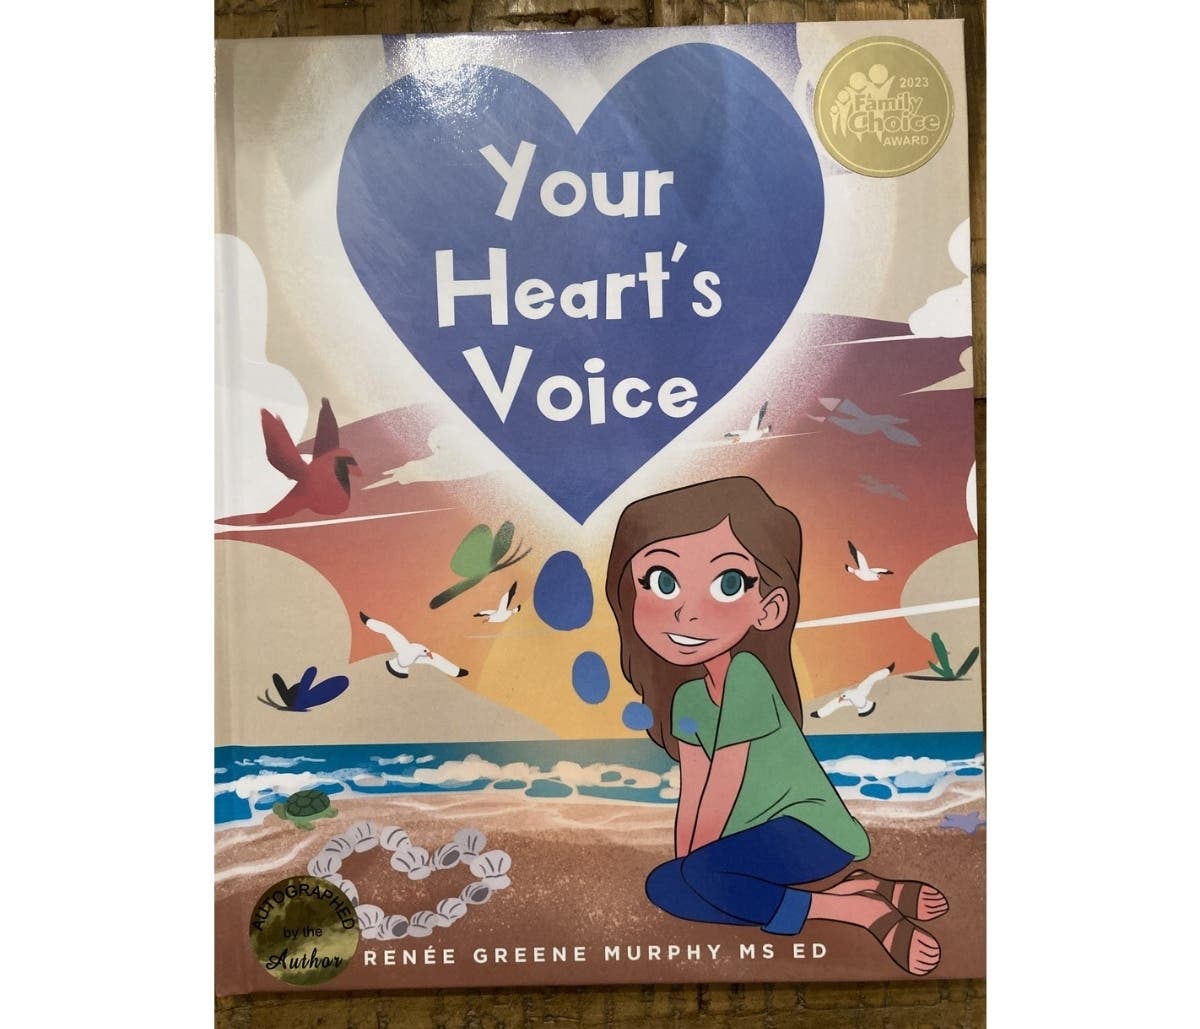 Renée Greene Murphy of Smithtown recently authored "Your Heart's Voice," a children's book.